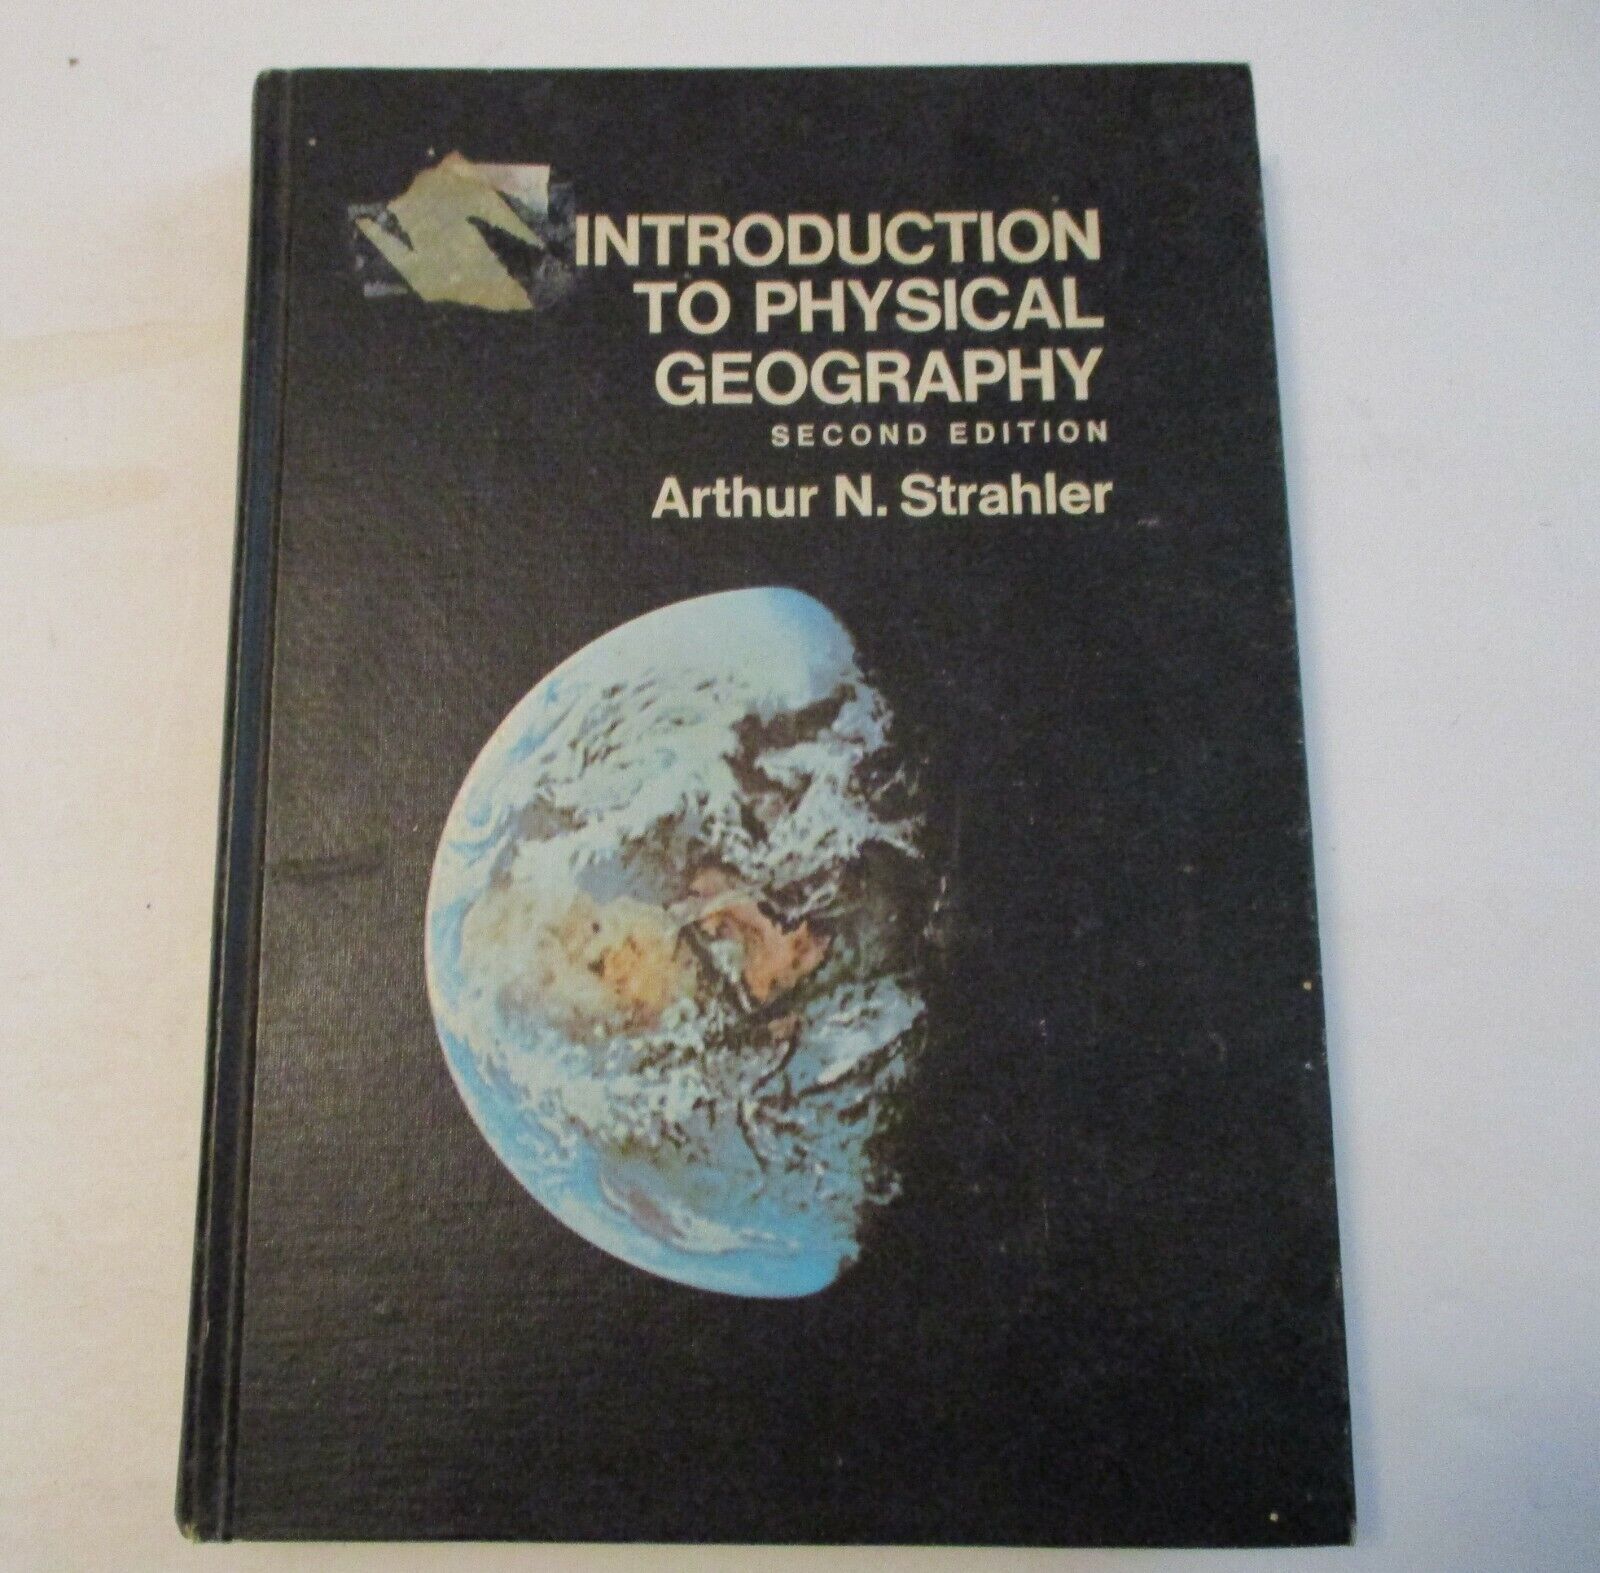 VINTAGE 1970 INTRODUCTION TO PHYSICAL GEOLOGY BOOK ~ EXTREMELY INTERESTING 